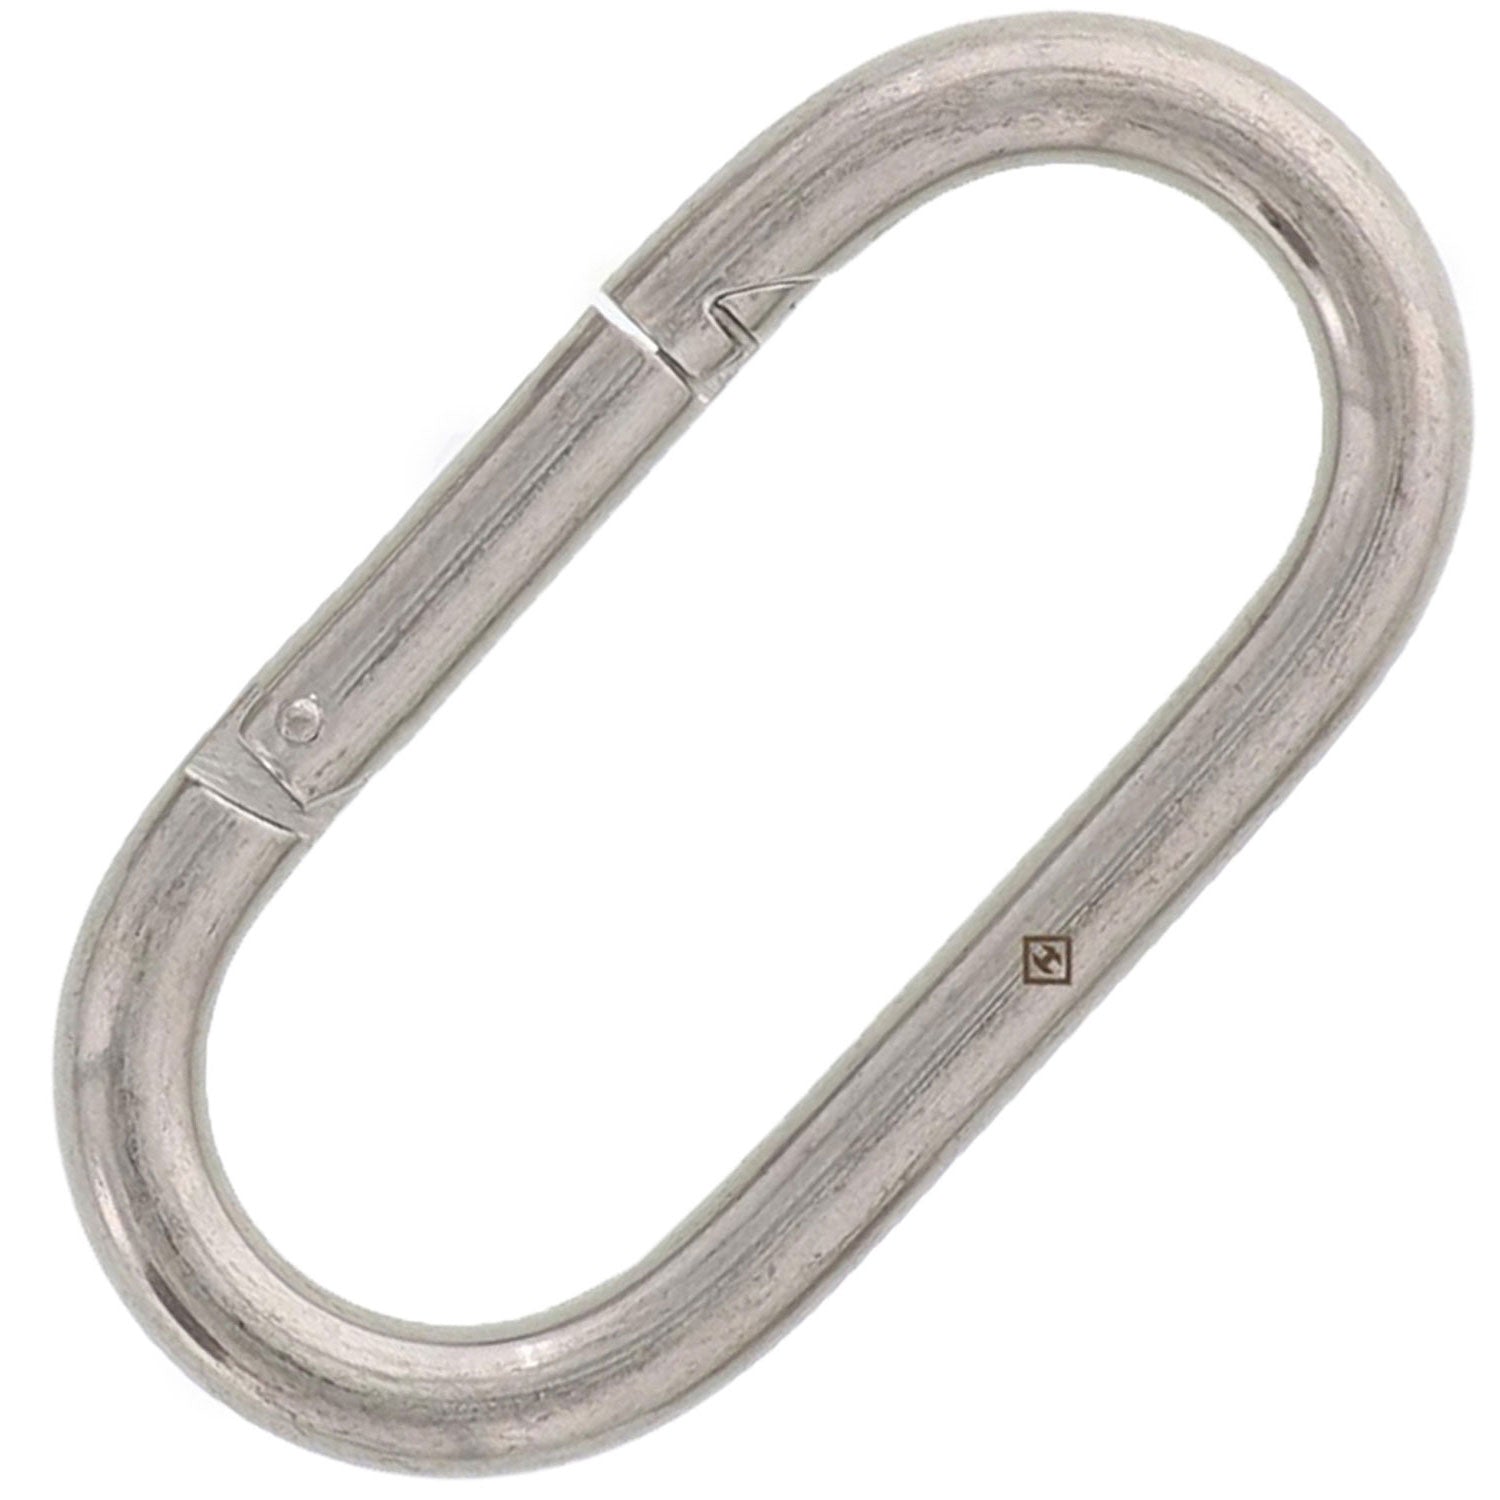 Fixed Eye Snap Hook 3/8 (Stainless Steel)